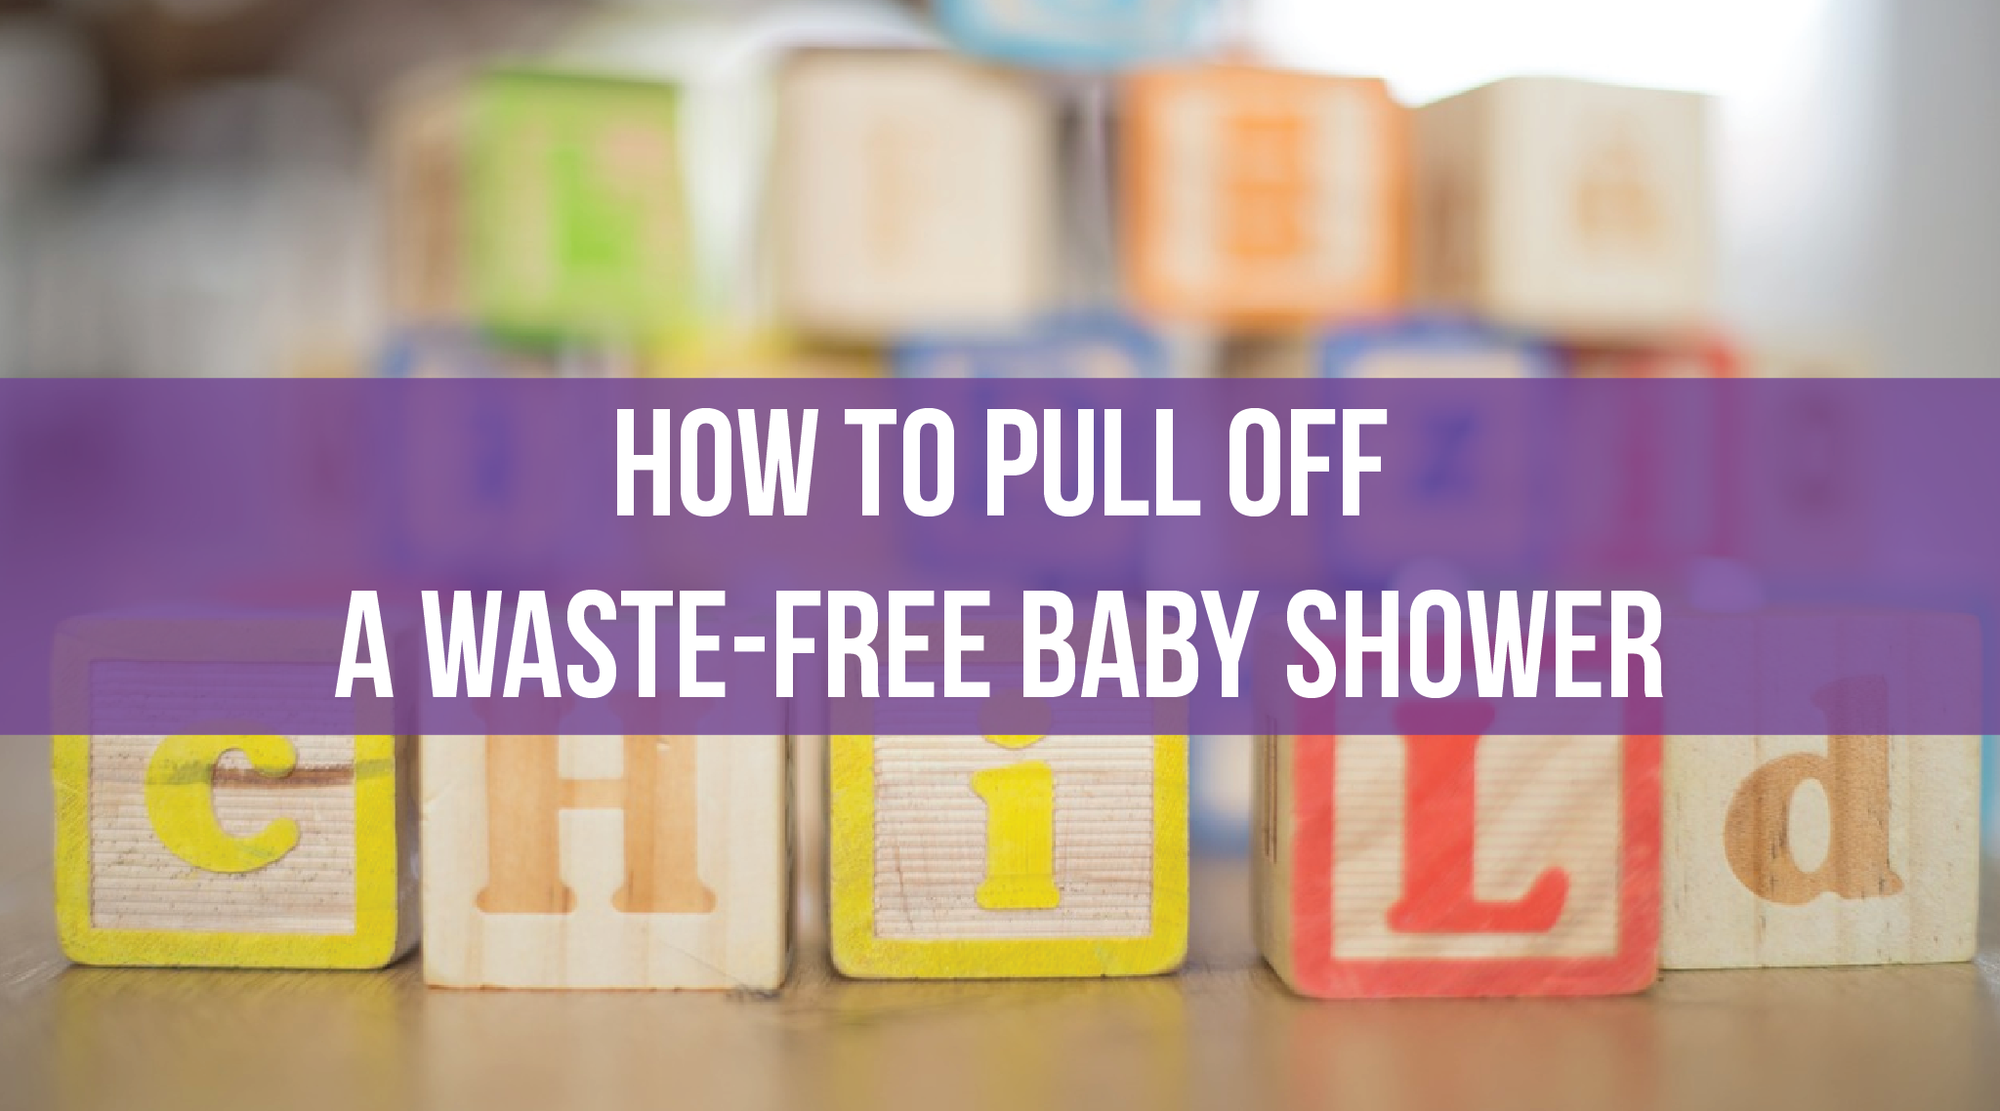 How to Pull-Off a Waste-Free Baby Shower